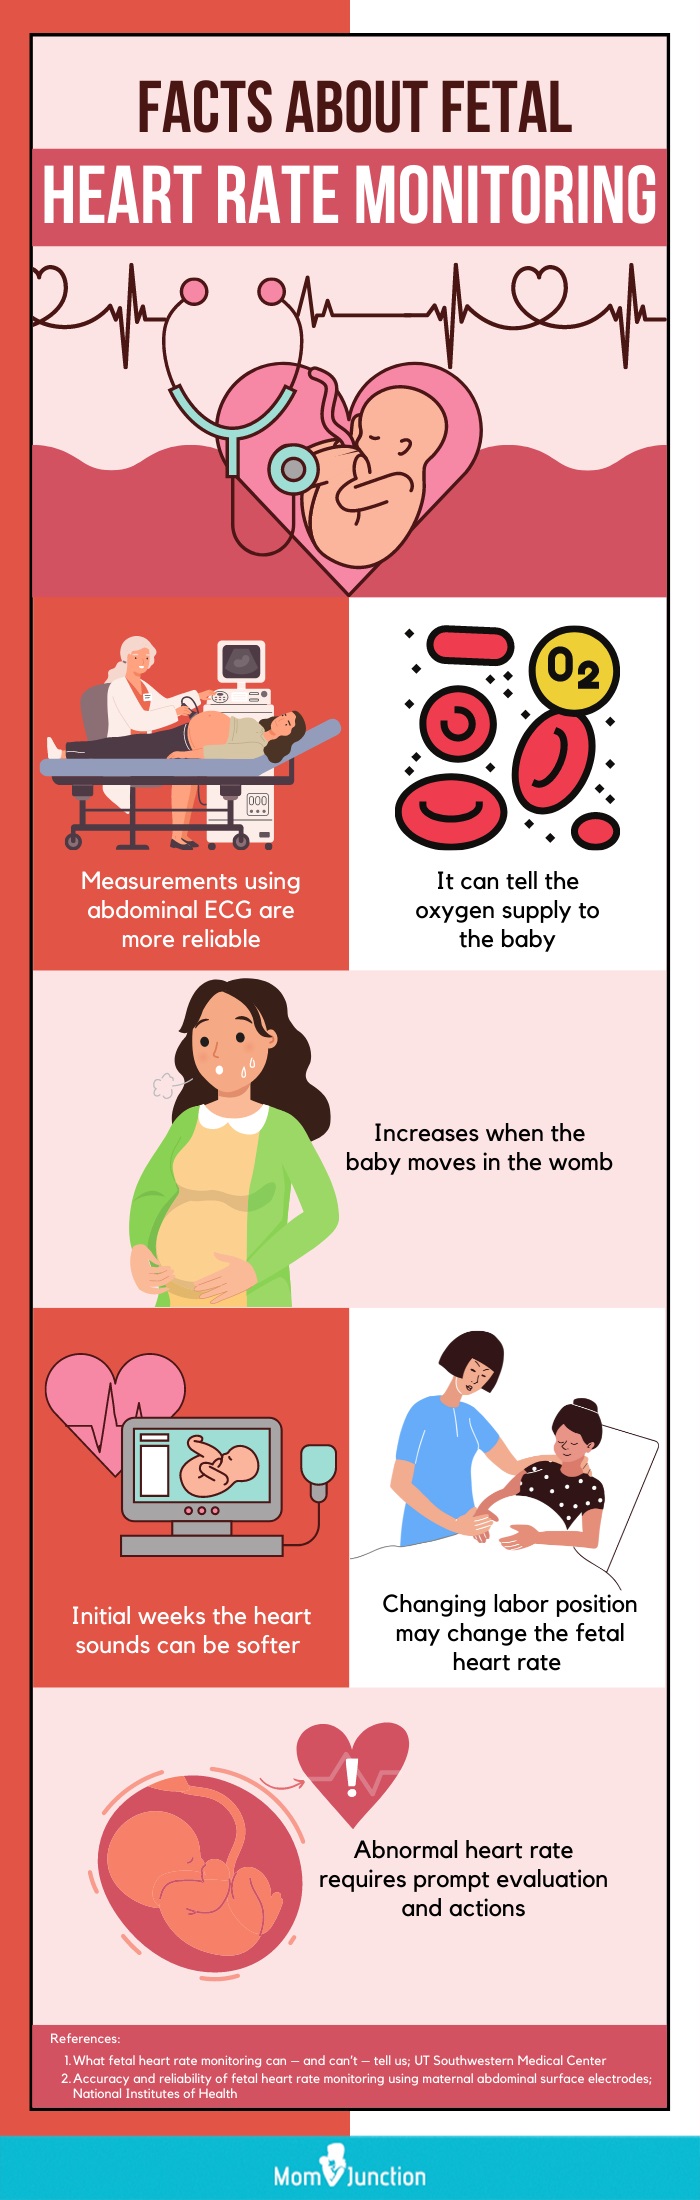 facts about fetal heart rate monitoring (infographic)